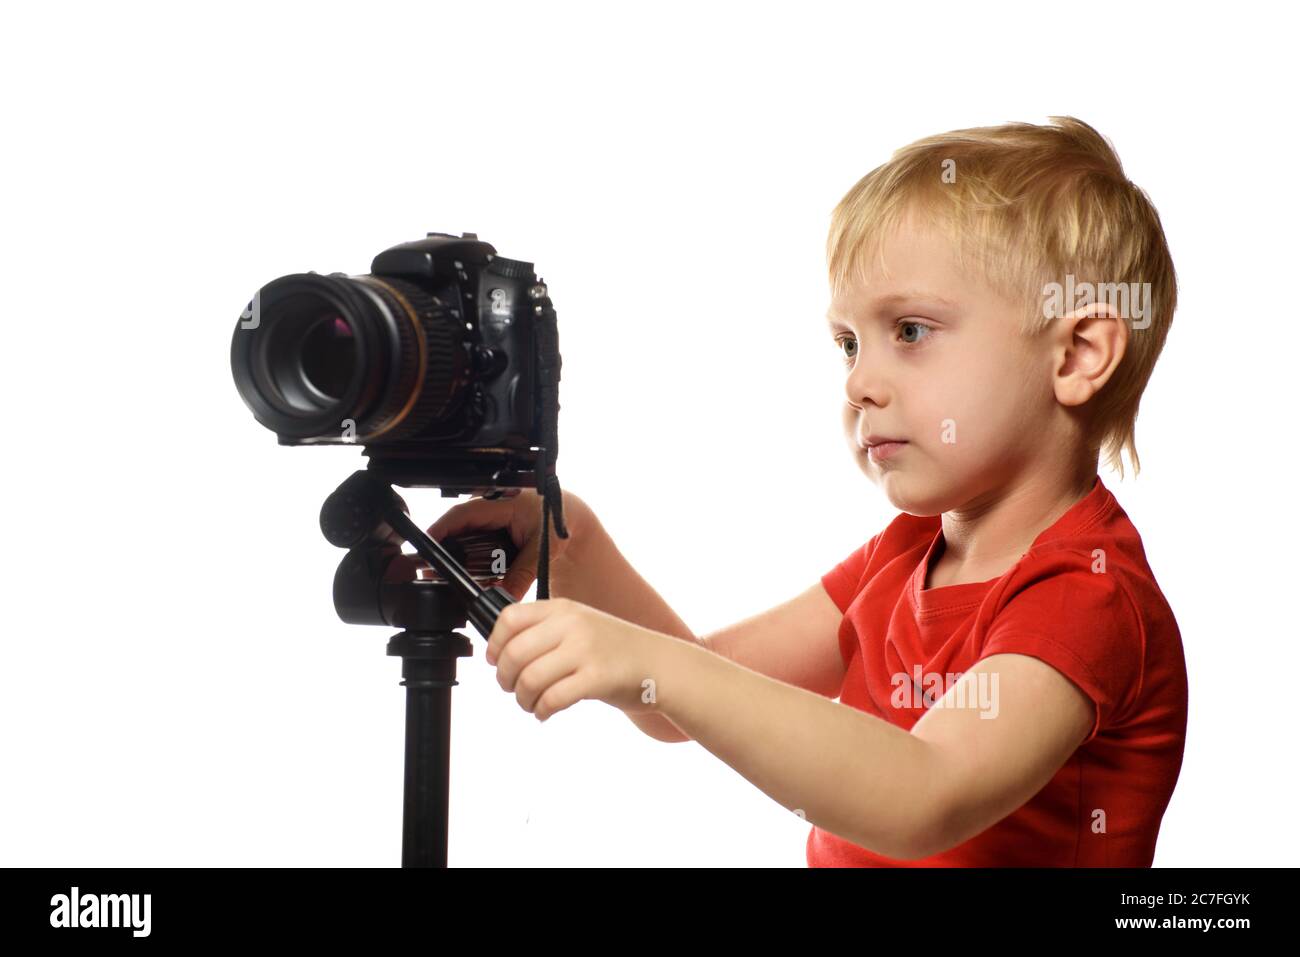 Blond boy shoots video on DSLR camera. Front view. White background, isolate Stock Photo